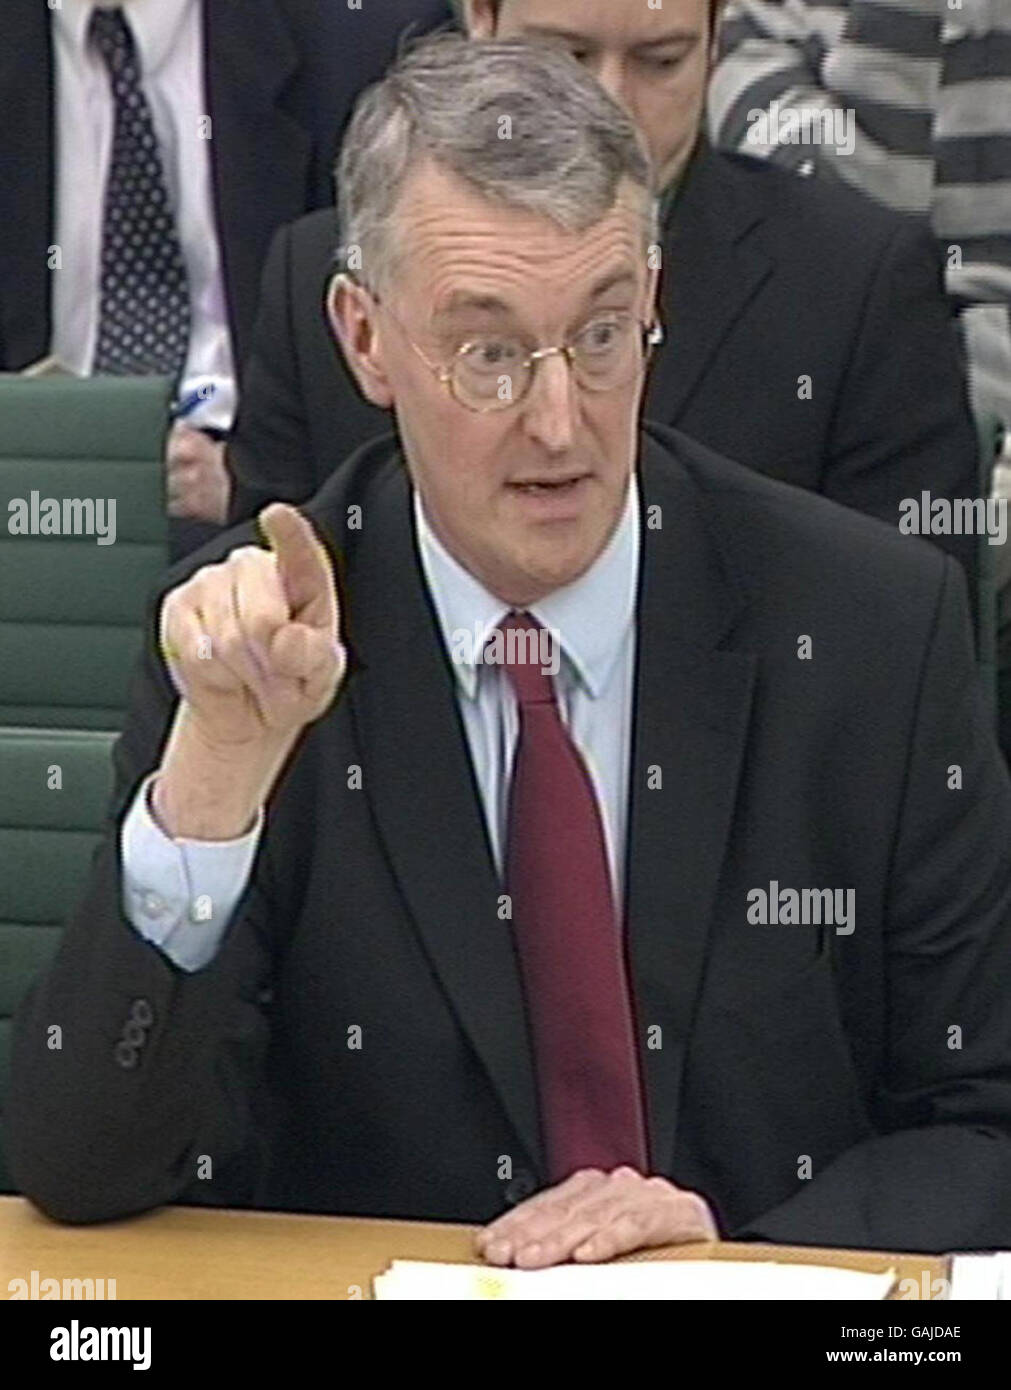 Environment Secretary Hilary Benn speaks during the Environment, Food and Rural Affairs committee meeting inside the Houses of Parliament, London. Stock Photo